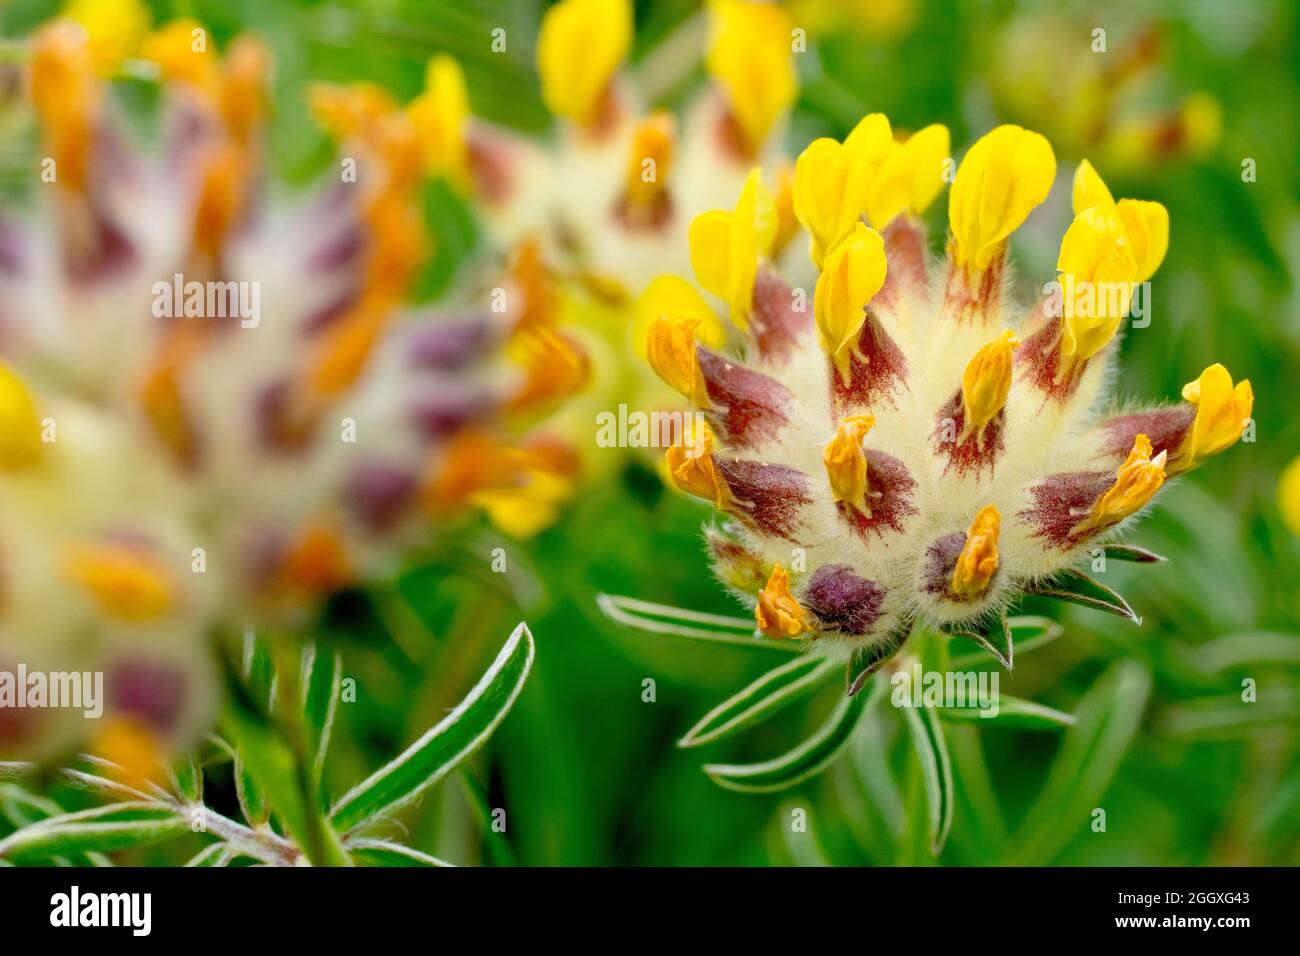 Kidney Vetch (anthyllis vulneraria), also known as Lady's Fingers, close up of the flat woolly flowerhead with new and old yellow flowers. Stock Photo